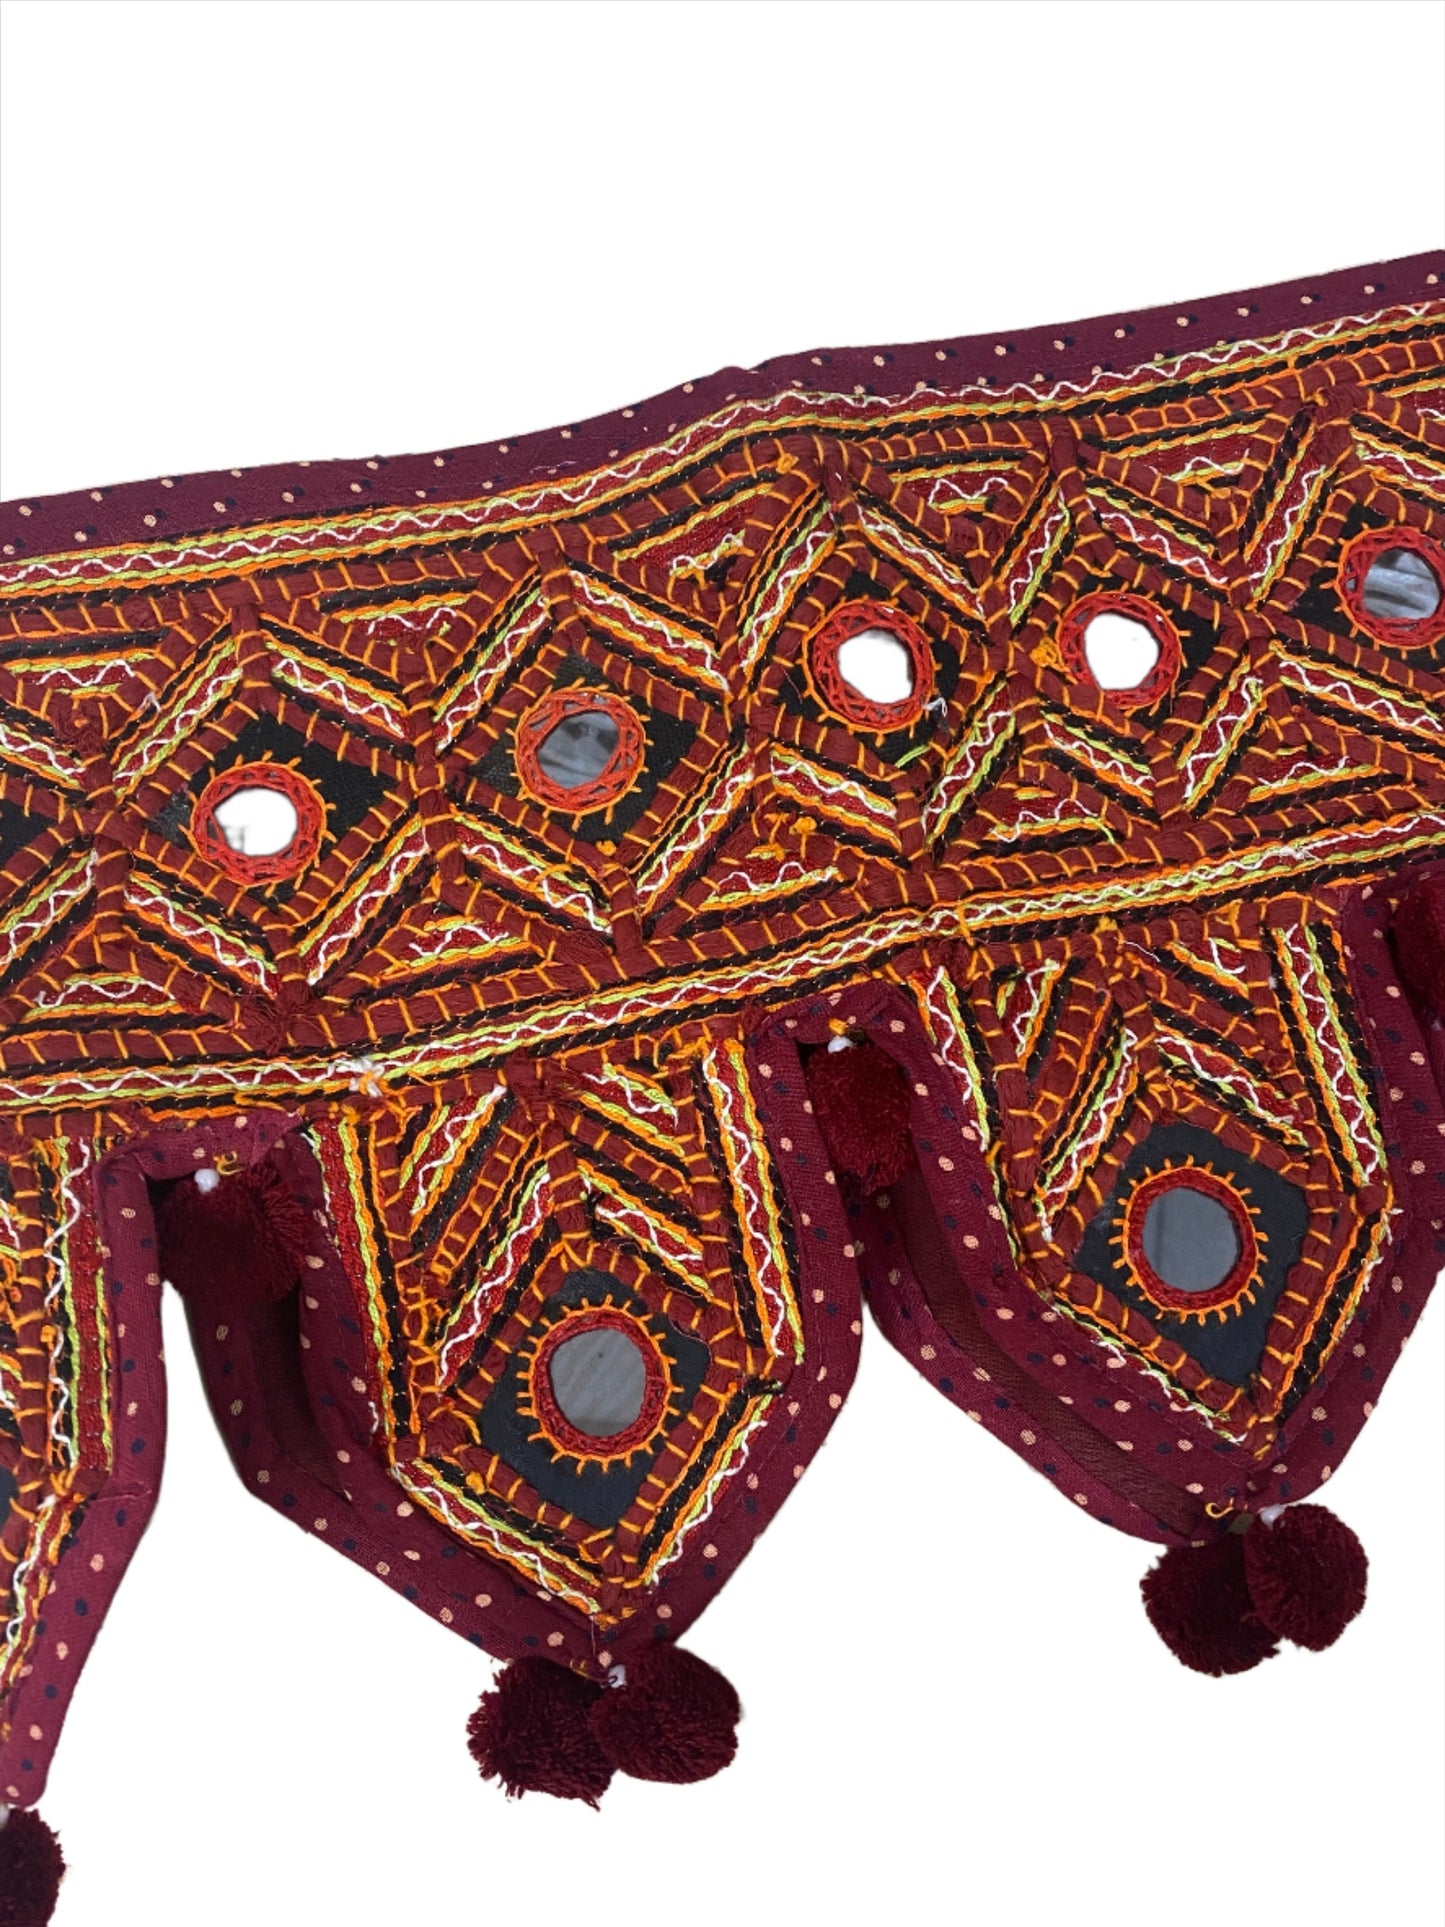 Rajasthani Embroidered Toran with Pom-Pom and Mirror